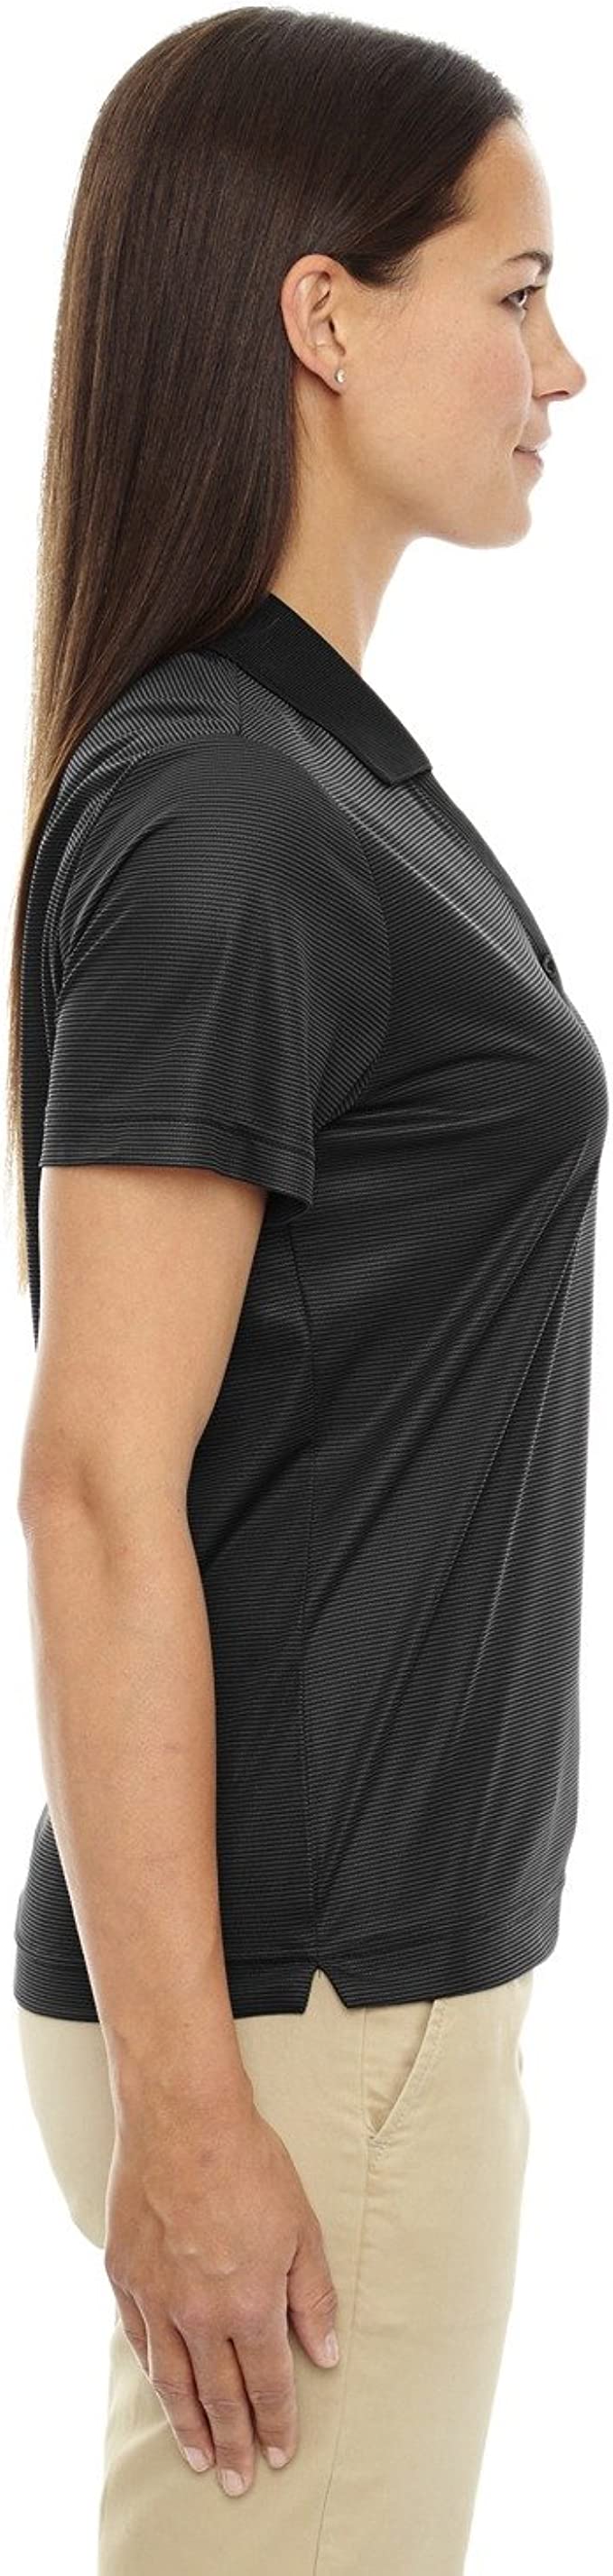 Extreme Eperformance Ladies Launch Striped Polo Shirt 75115 New